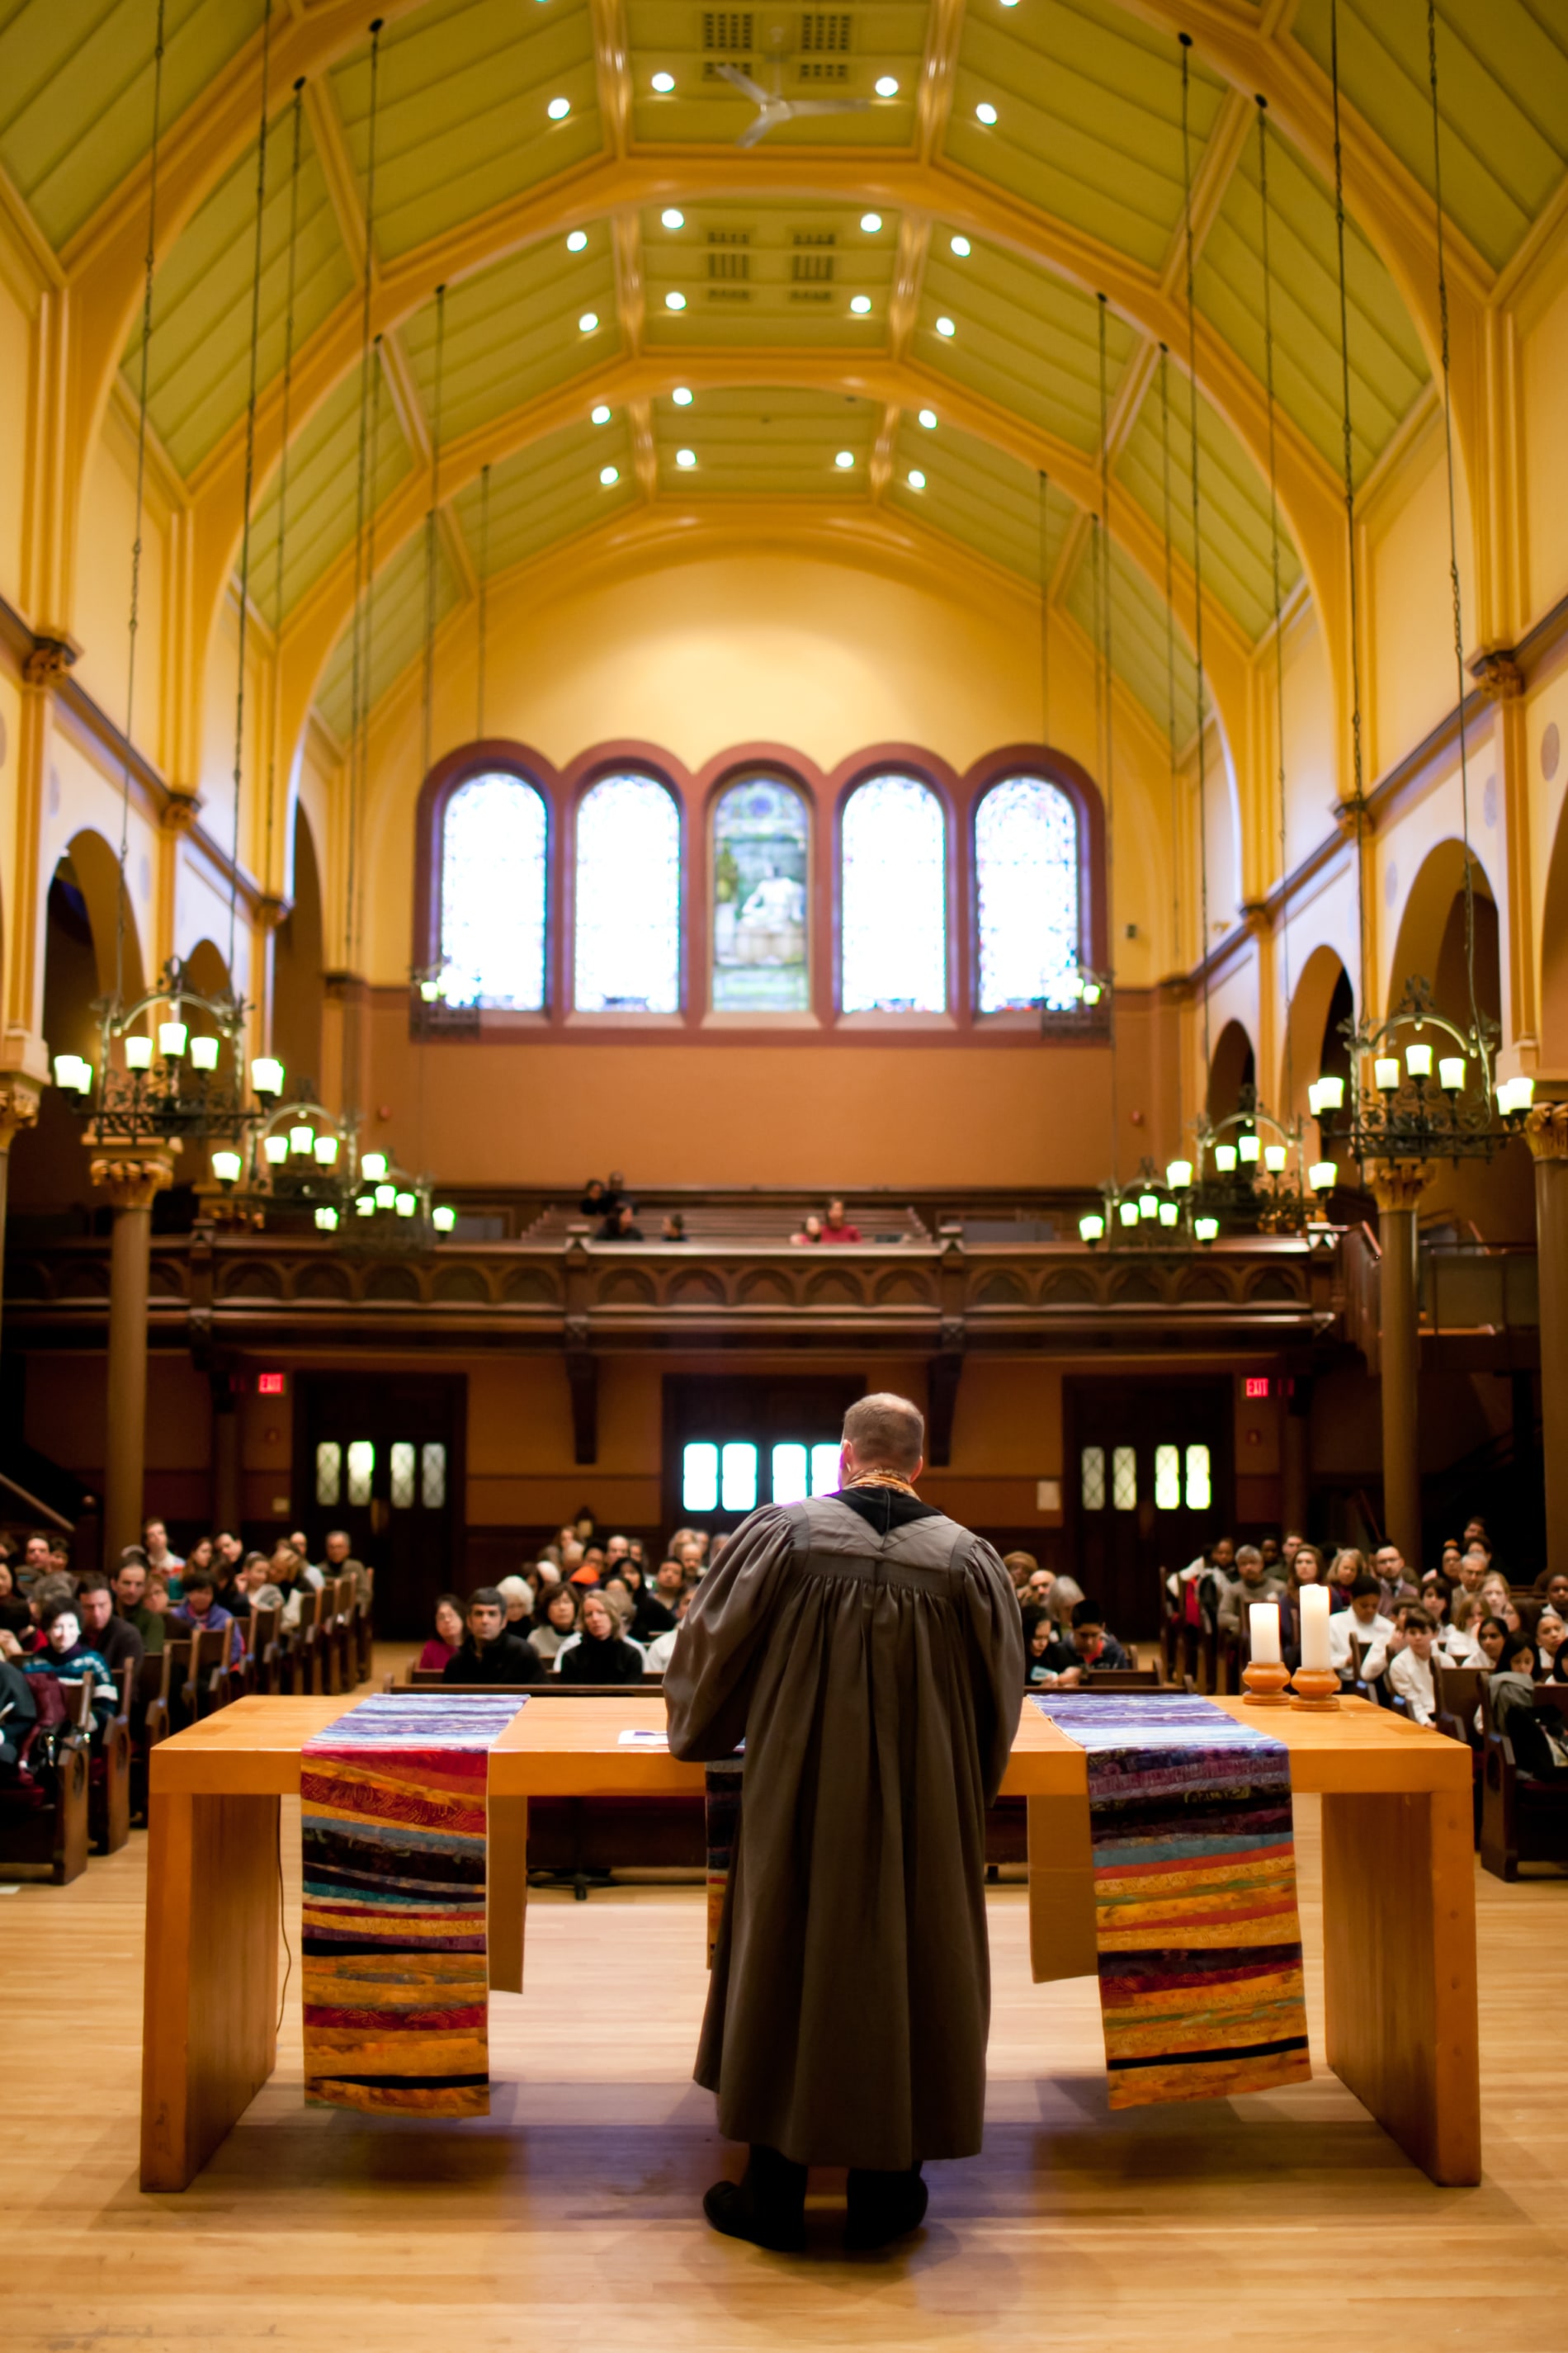 A wide angle view showing the congregation in worship in the First Church sanctuary